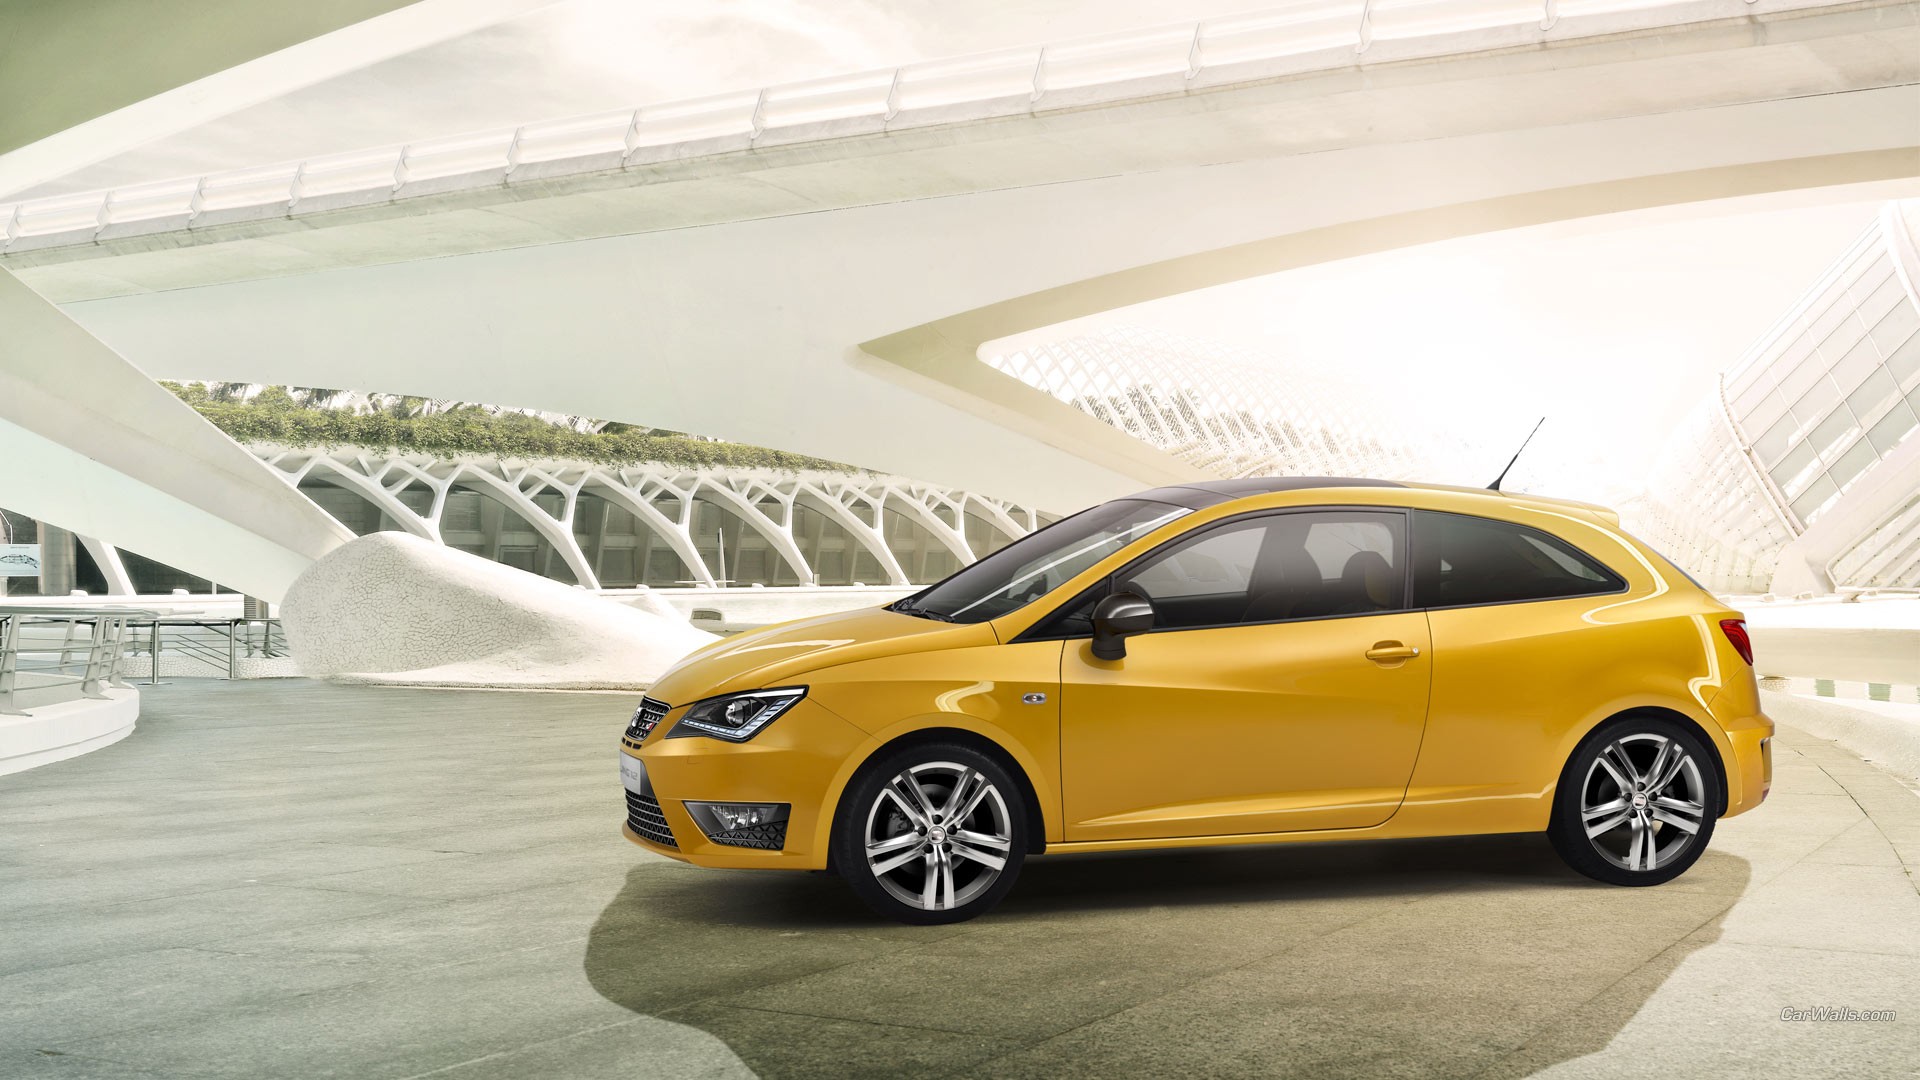 General 1920x1080 Seat Ibiza car concept cars yellow cars seat vehicle Spanish cars Volkswagen Group hatchbacks